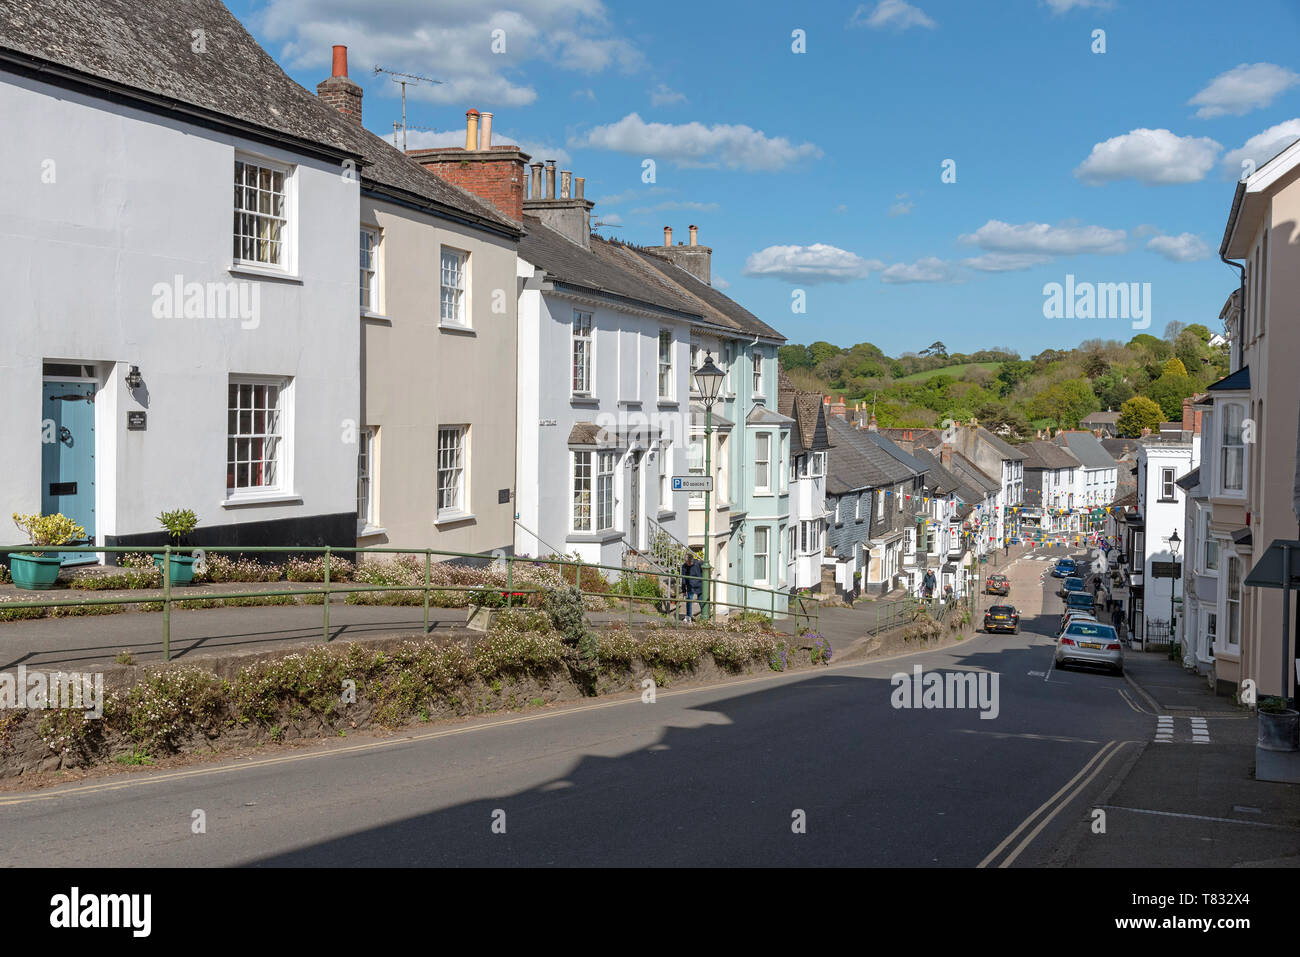 Modbury, South Devon, England, UK. May 2019. The market town of Modbury viewed from the west looking downhill to the town centre Stock Photo